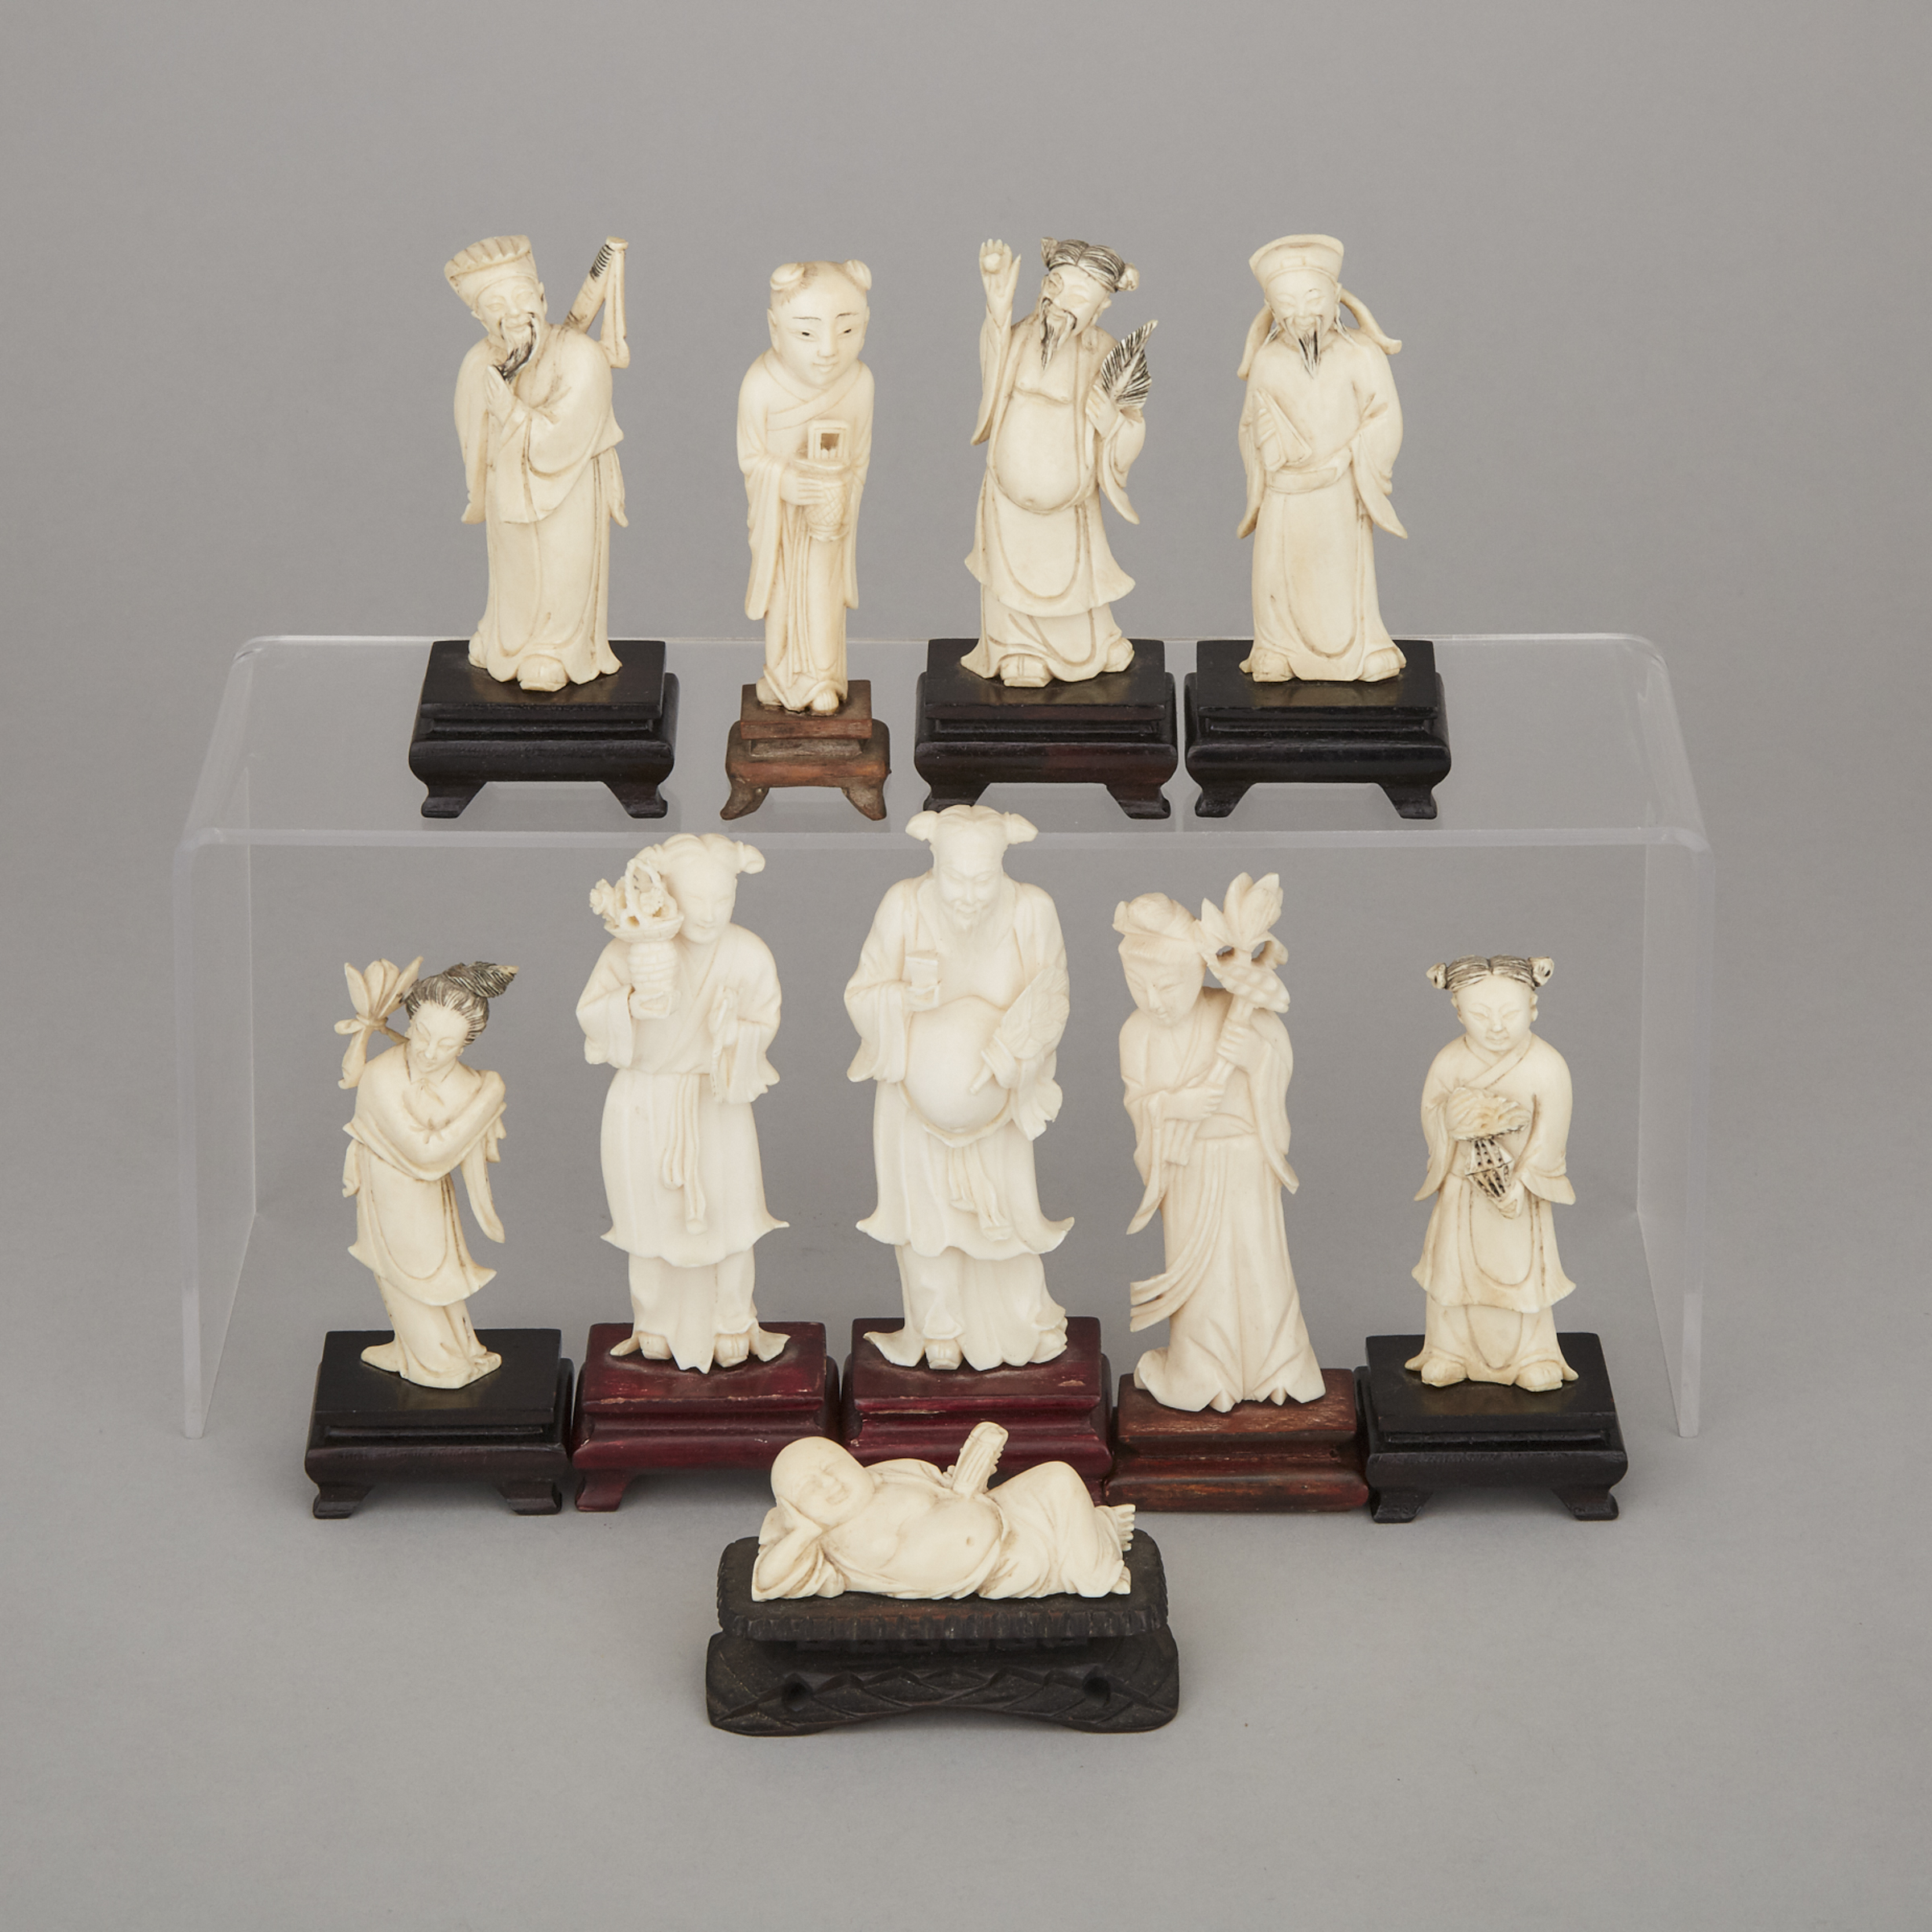 A Group of Ten Ivory Carved Figures of Immortals, Early 20th Century